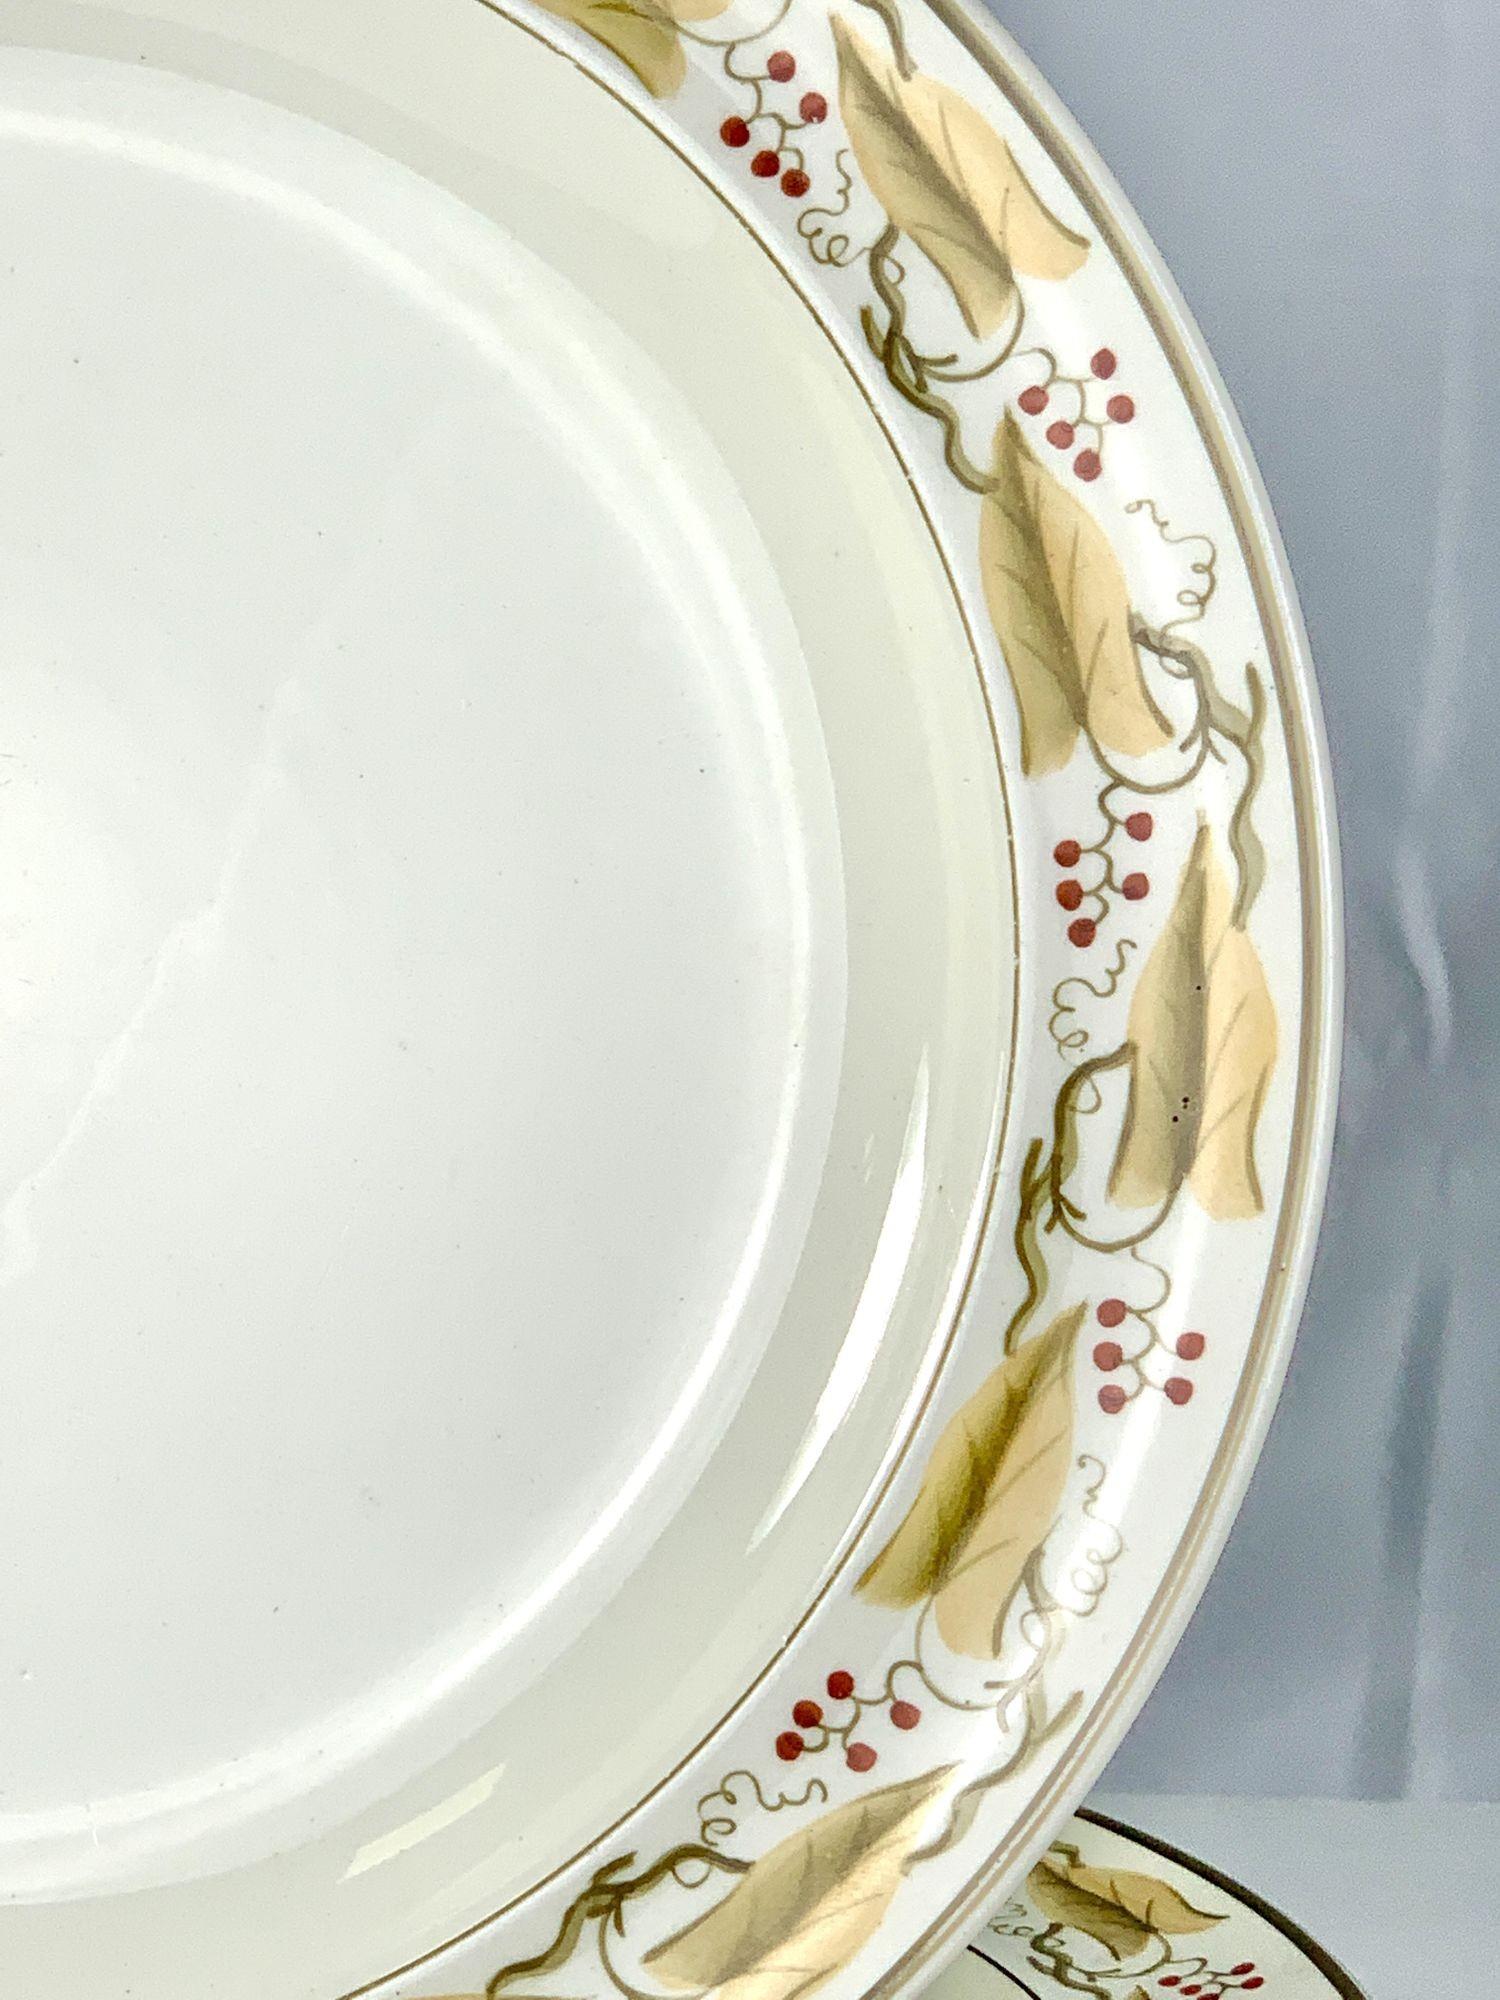 wedgwood dishes made in england